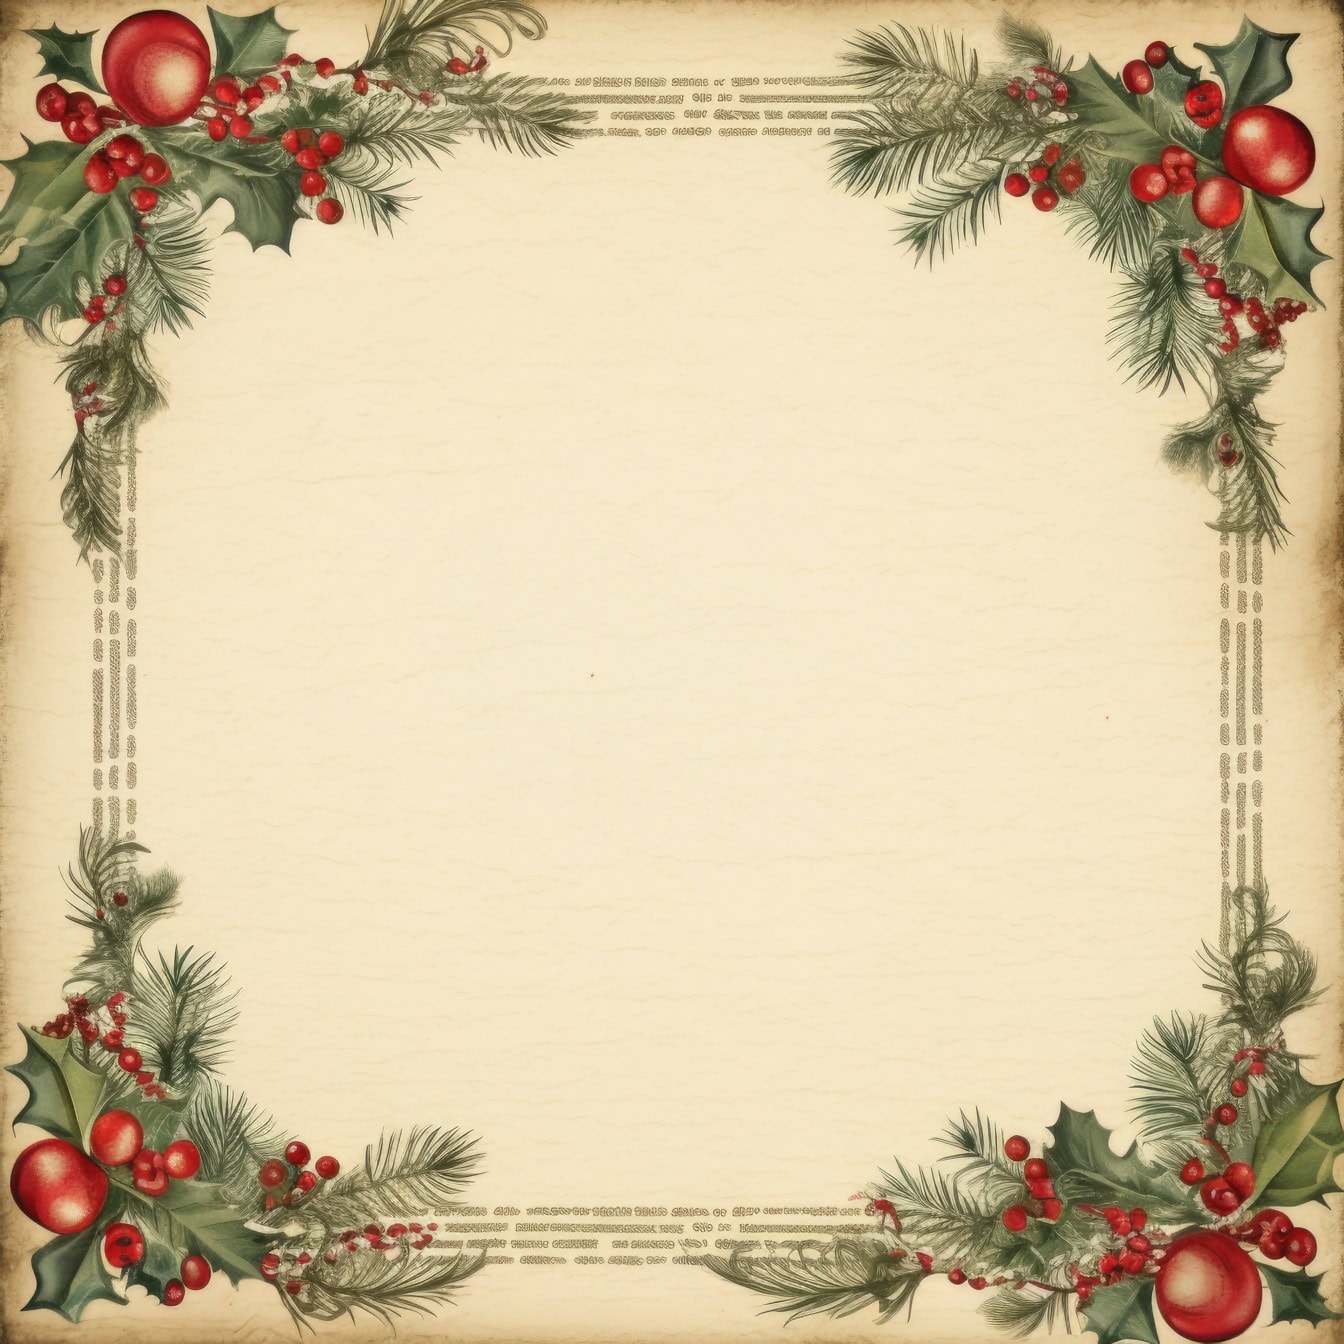 A traditional New Year greeting card template in retro style with square frame with holly wreath with berries